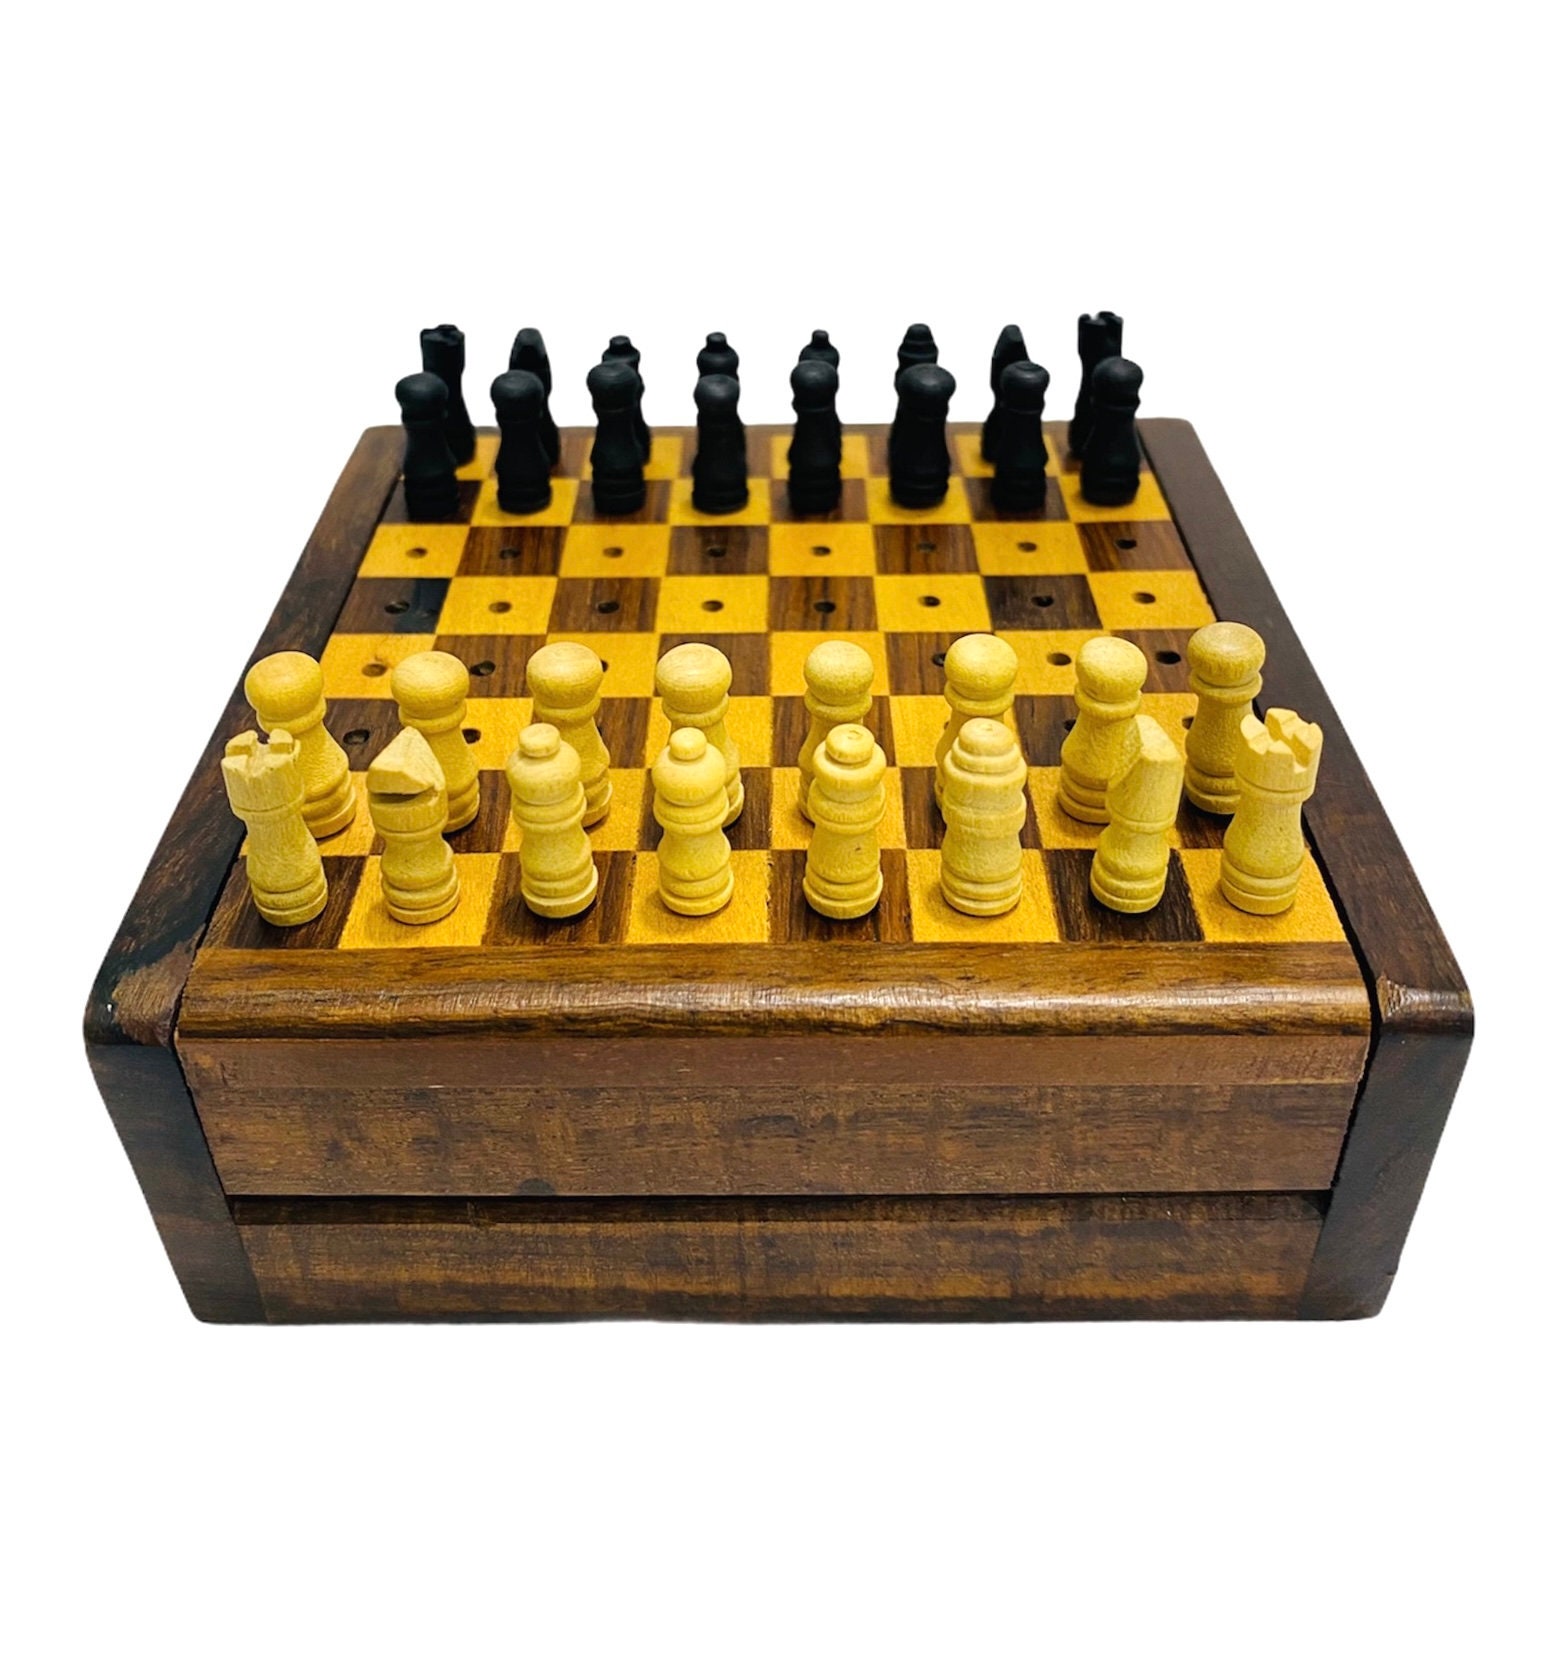 Carry Bag for Chess Pieces Portable Chess Set Gifts for Kids and Adults Premium Folding Chess Board Aorkeay Magnetic Chess Set Travel Chess Set 